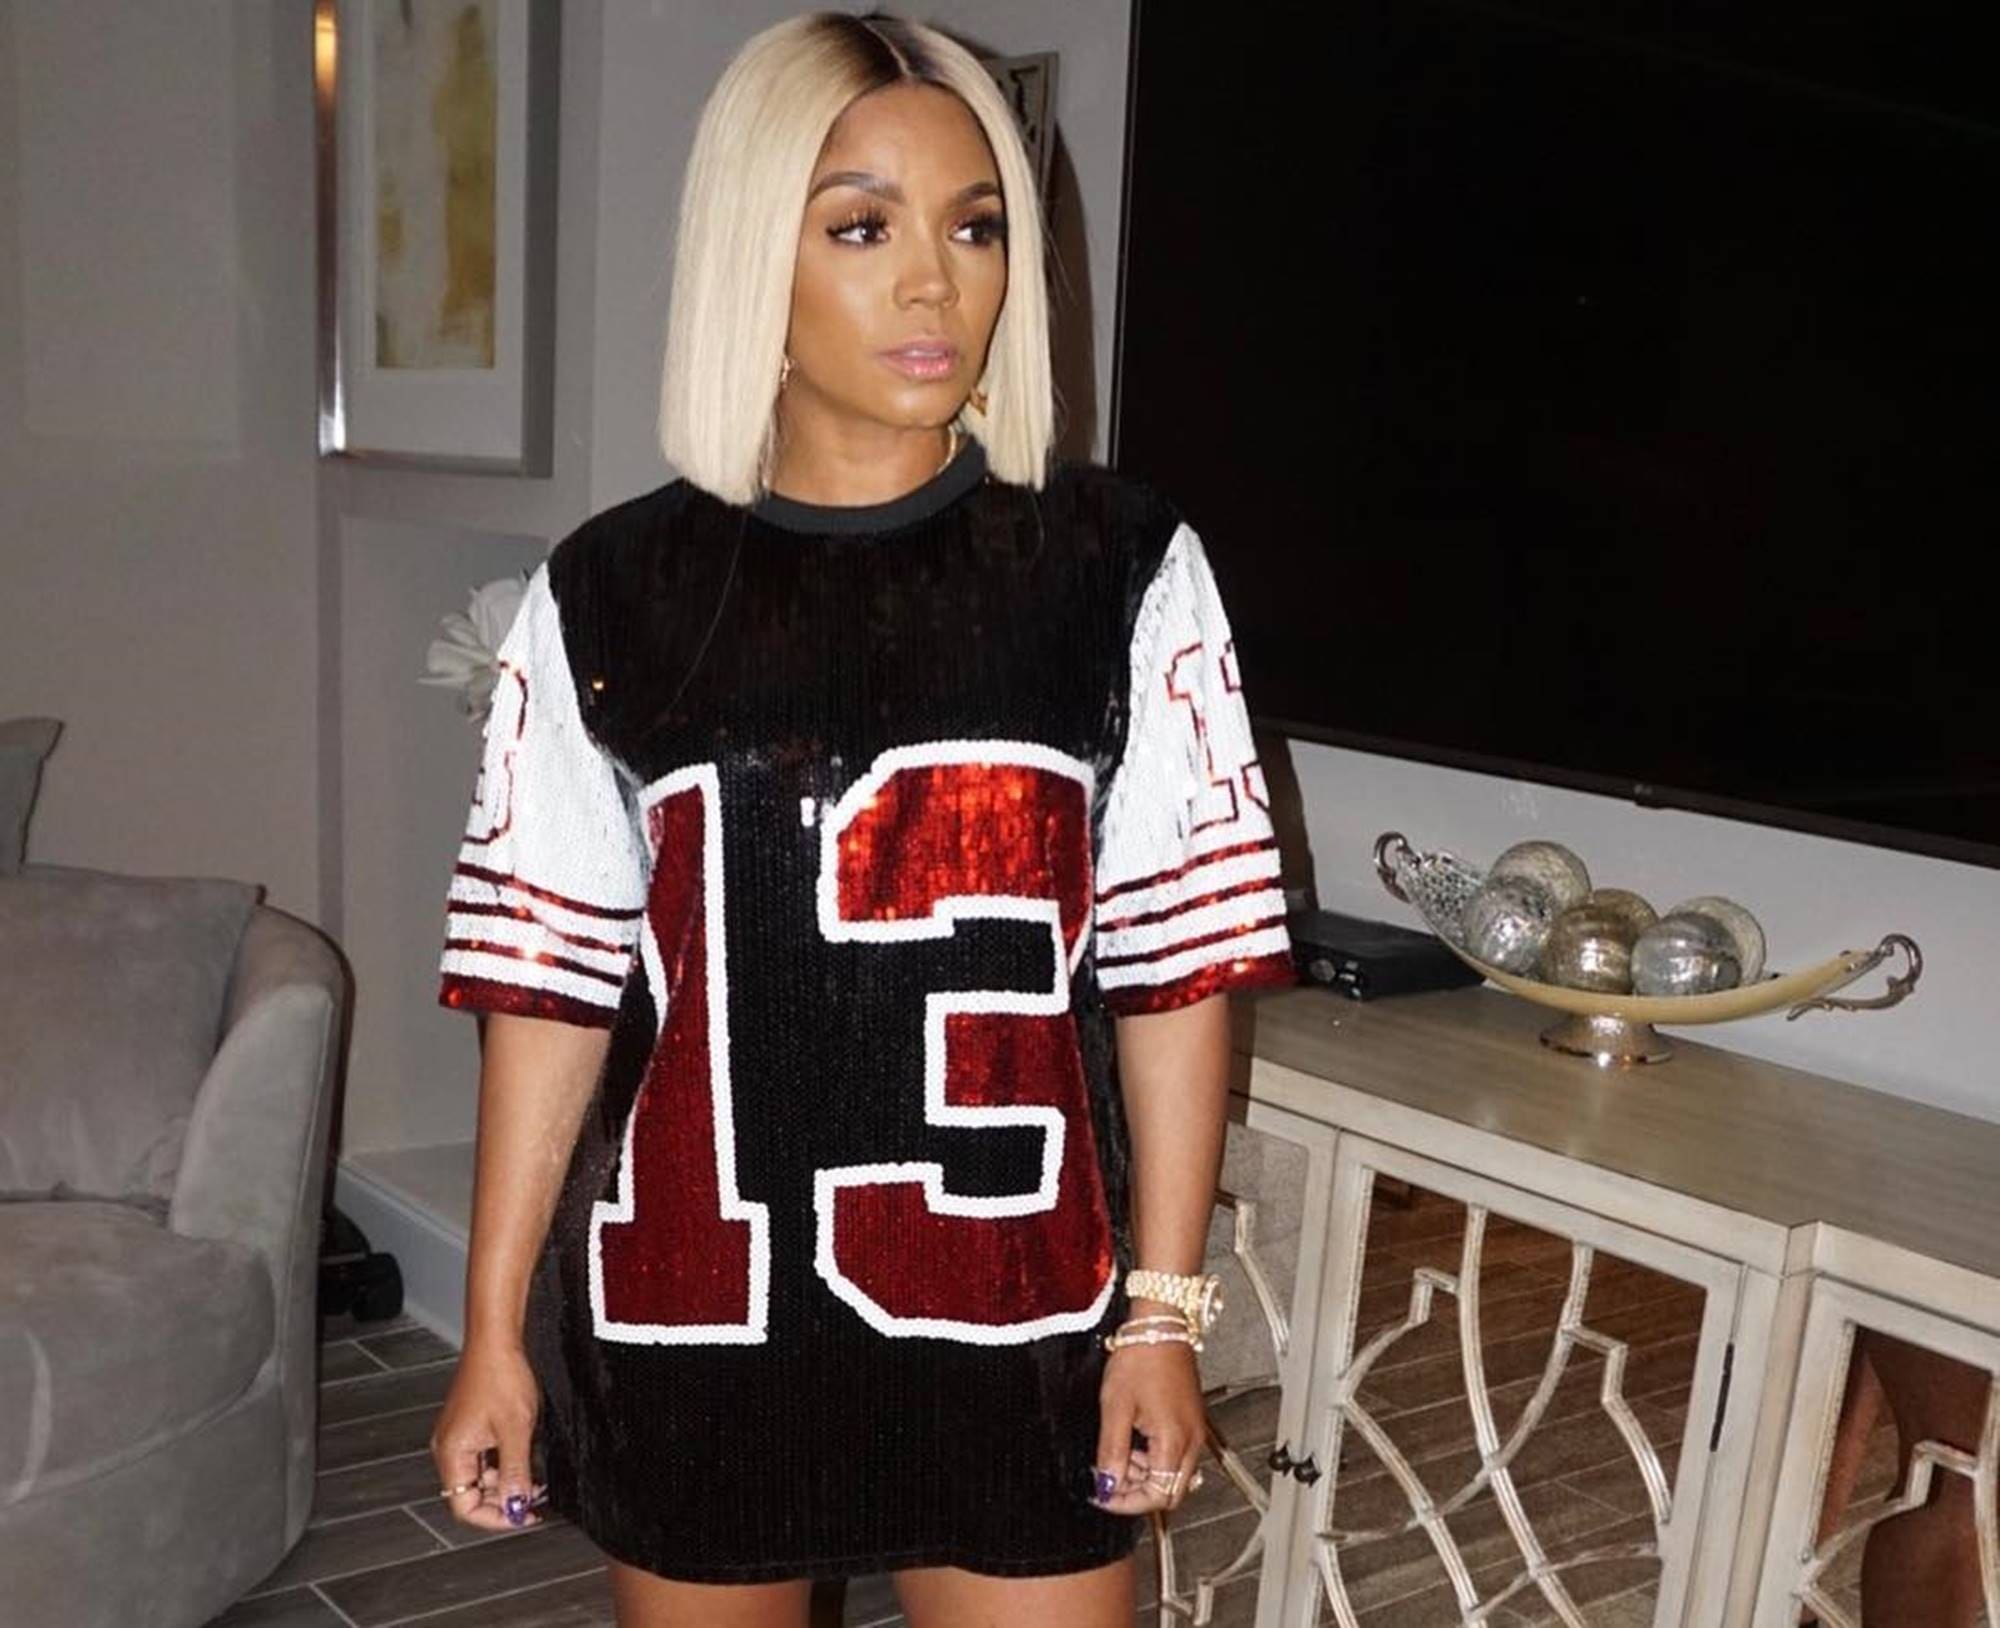 Rasheeda Frost Shows Fans Her Favorite Blonde Hair And They Agree It's The Ideal Choice For Her